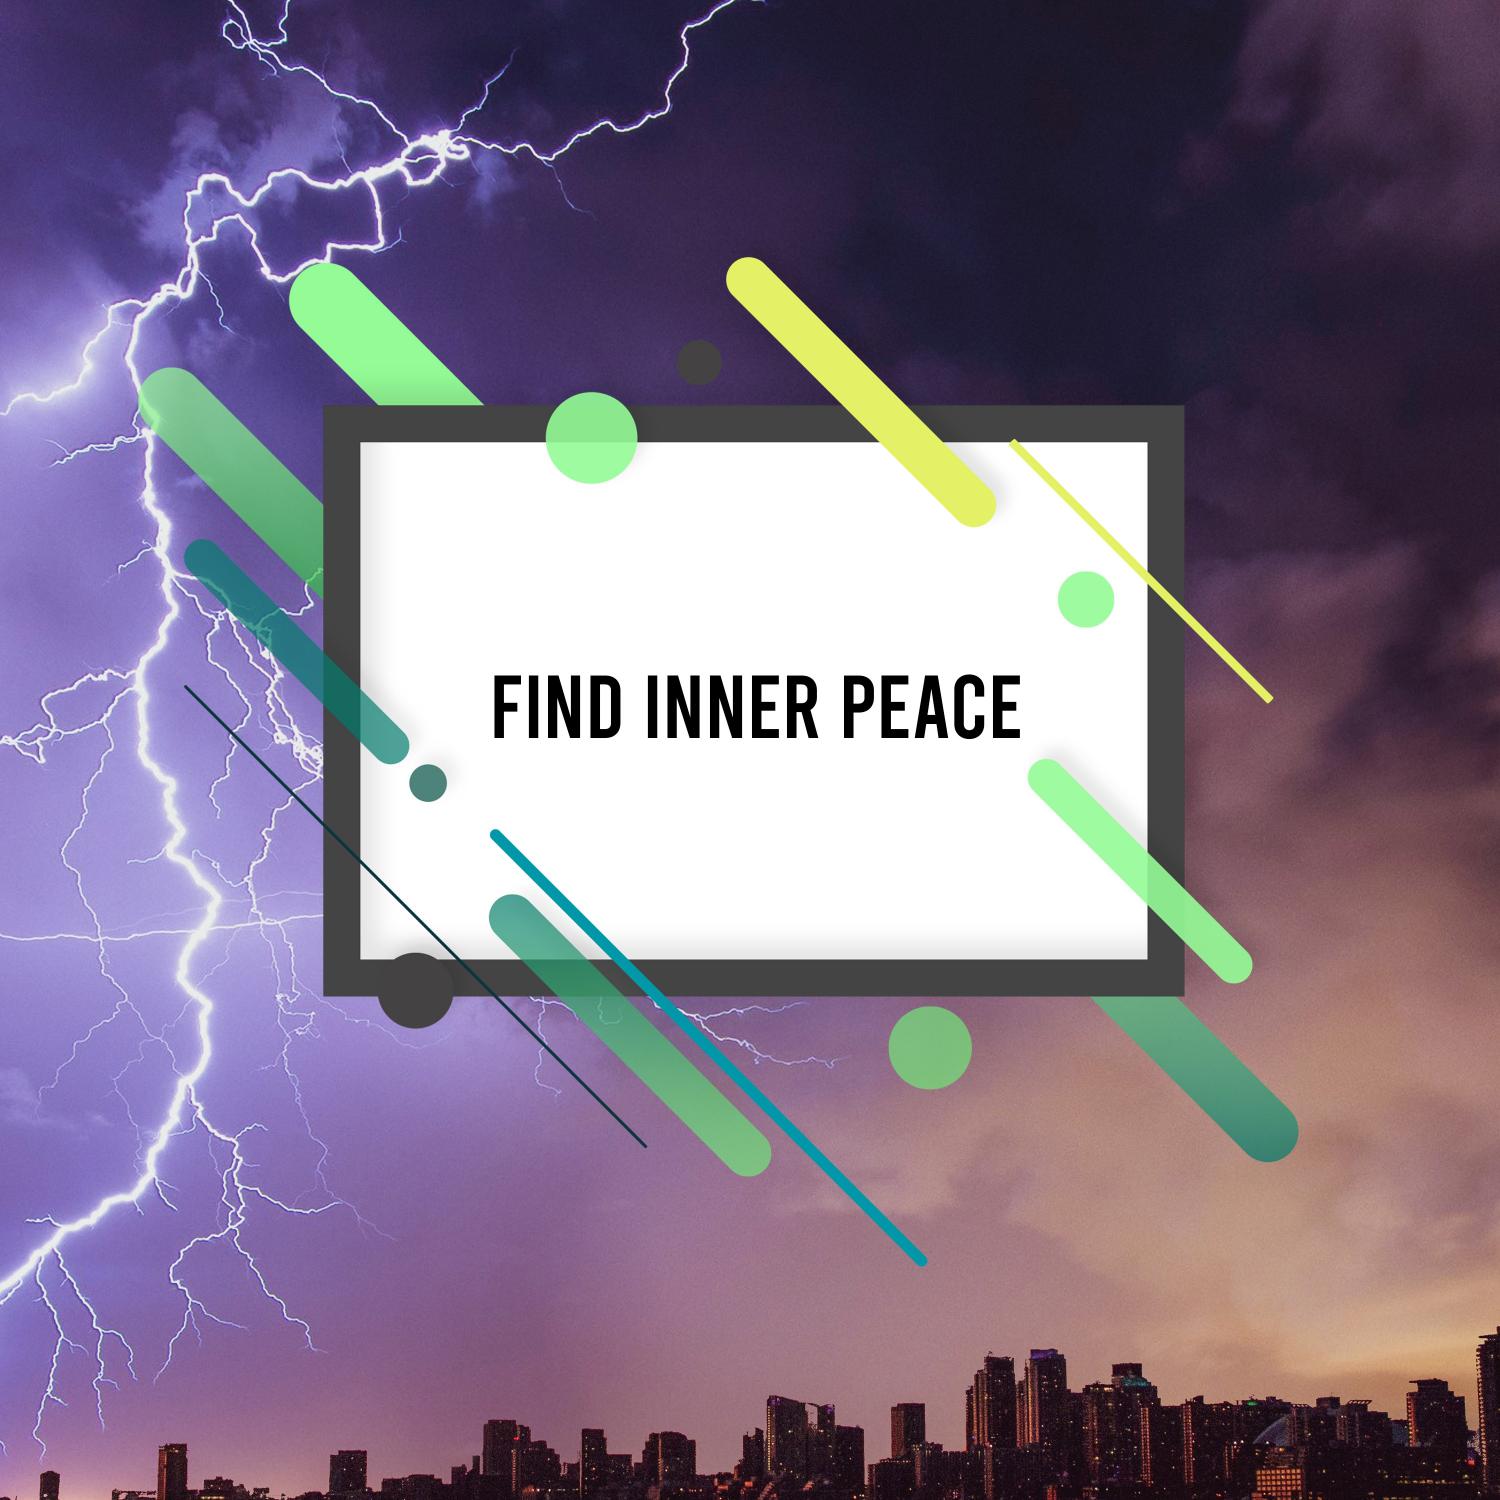 Meditation Sounds - Finding Inner Peace